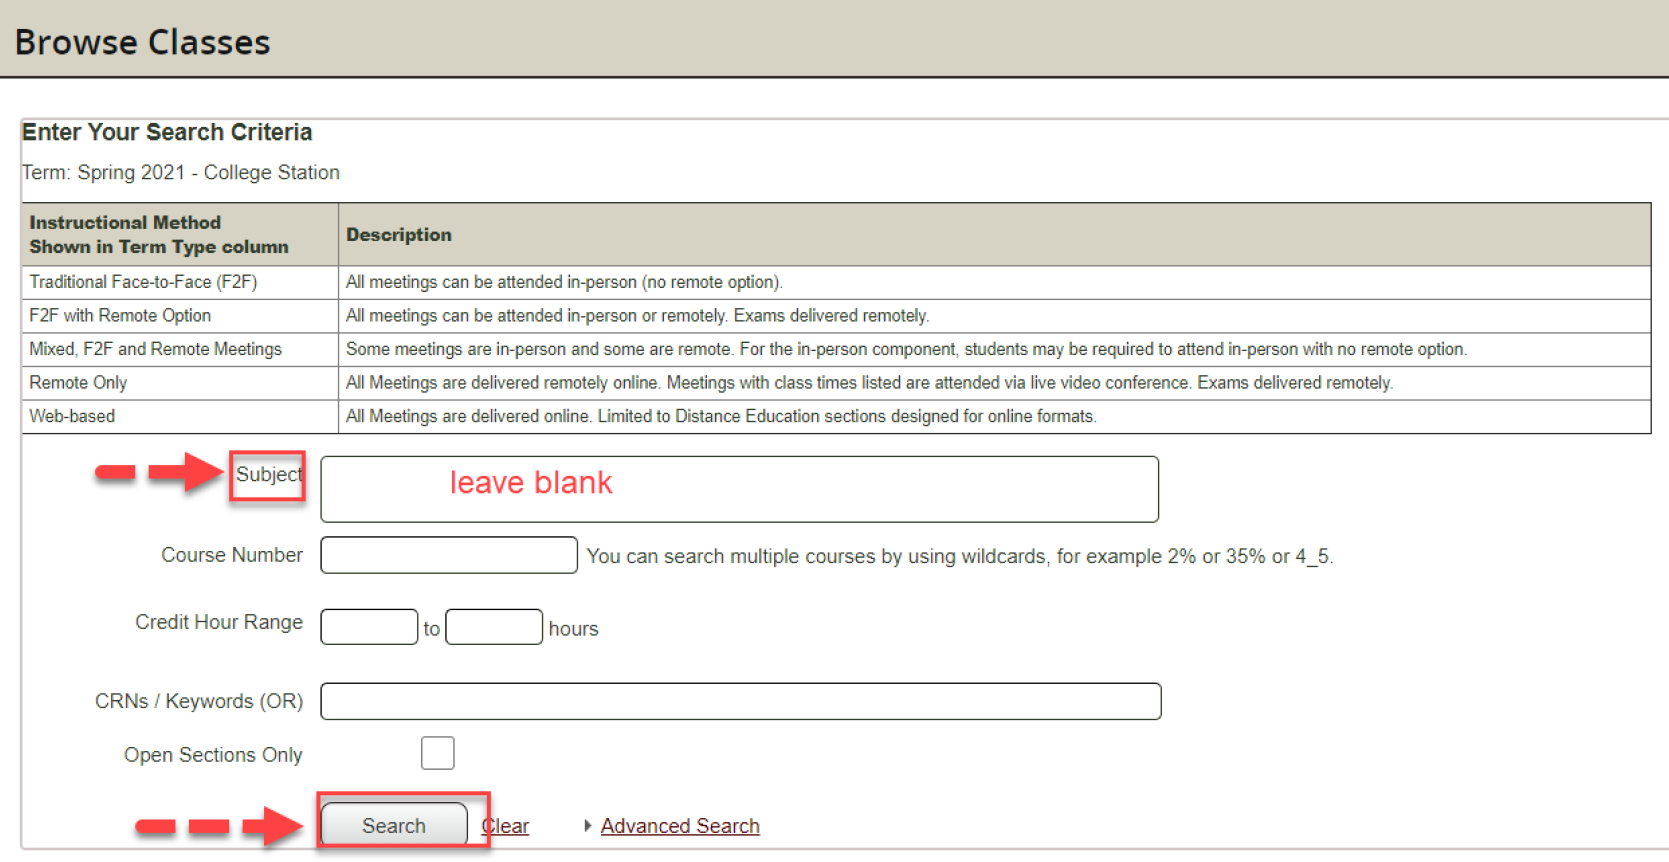 Screenshot of the Browse Classes window in Compass where you can search for mini-mester classes.